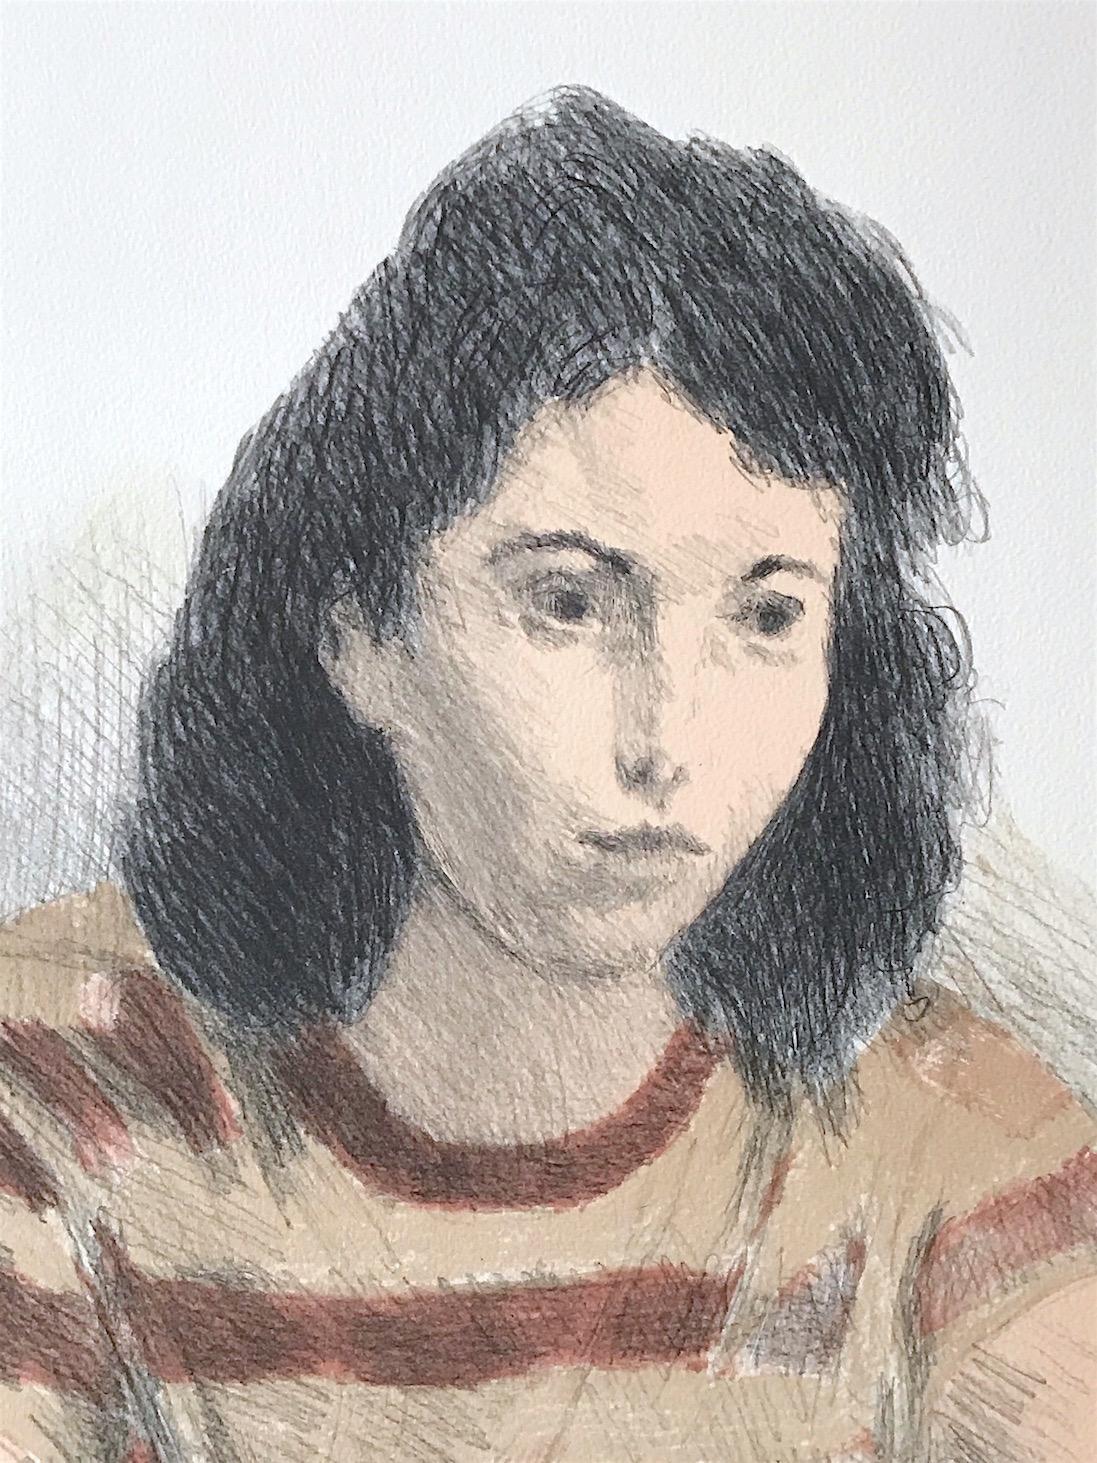 YOUNG WOMAN, STRIPED TEE SHIRT Signed Lithograph, Realist Portrait, Rust, Peach - Print by Raphael Soyer